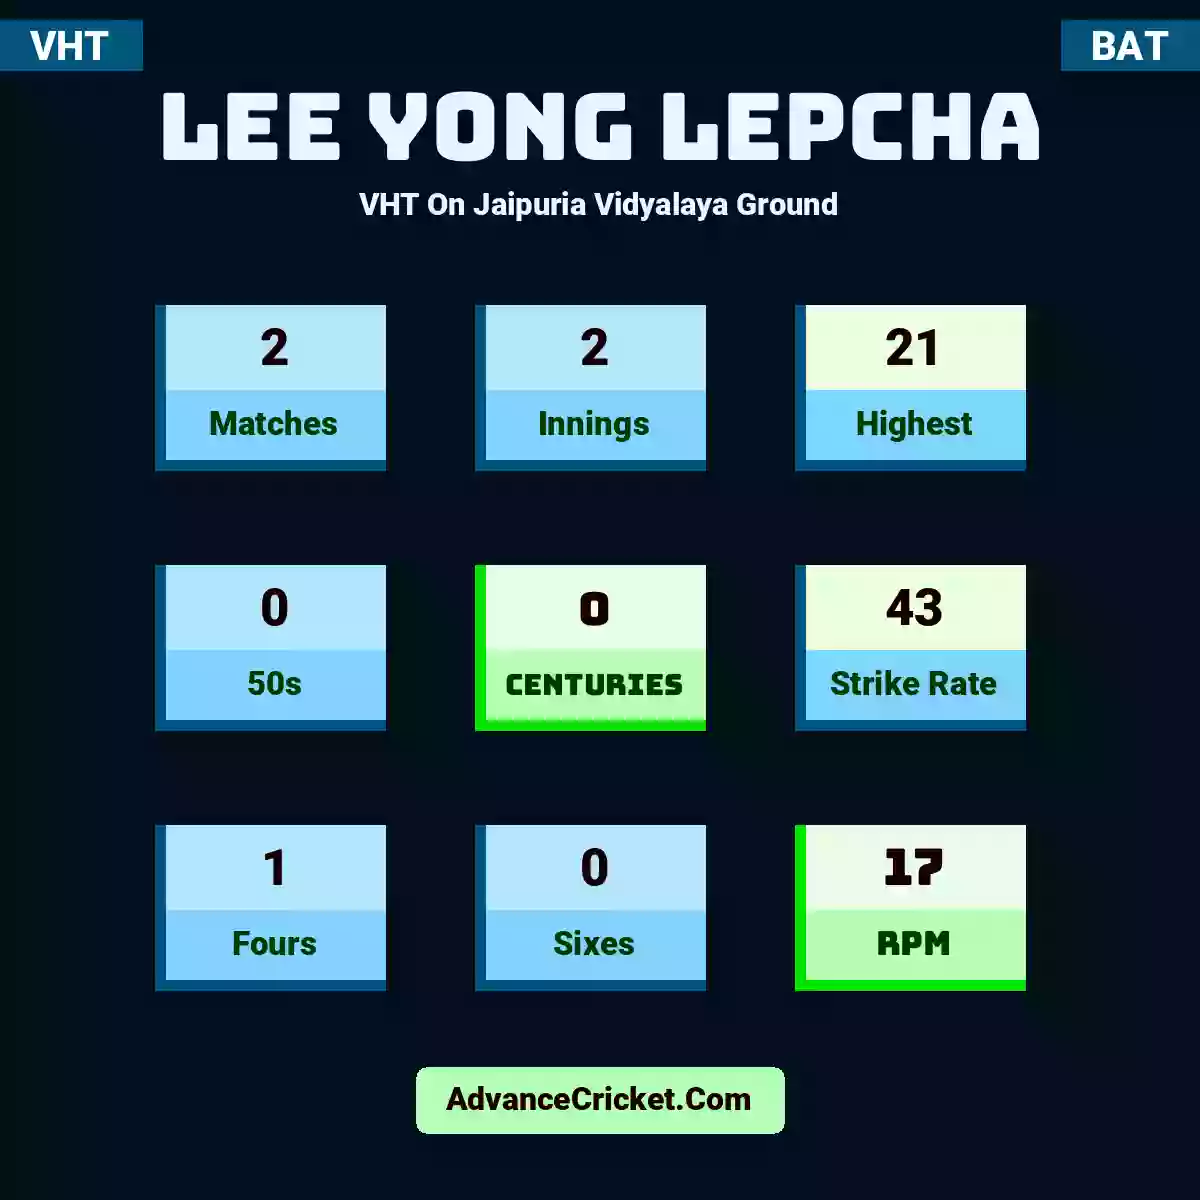 Lee Yong Lepcha VHT  On Jaipuria Vidyalaya Ground, Lee Yong Lepcha played 2 matches, scored 21 runs as highest, 0 half-centuries, and 0 centuries, with a strike rate of 43. L.Lepcha hit 1 fours and 0 sixes, with an RPM of 17.